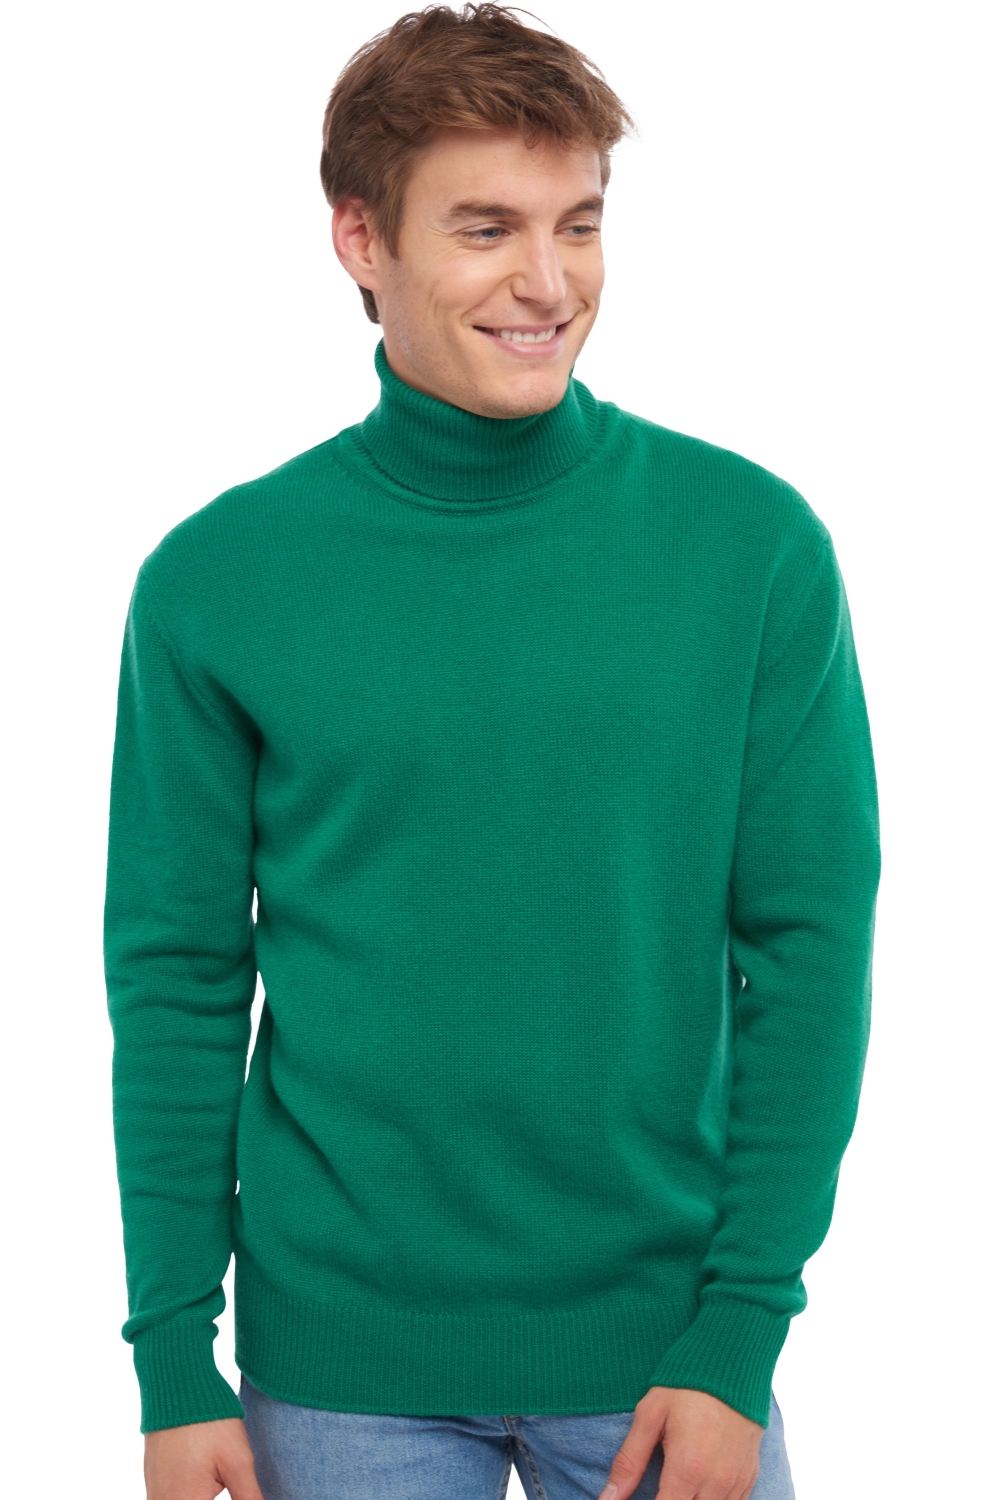 Cachemire pull homme col roule edgar 4f vert anglais 4xl